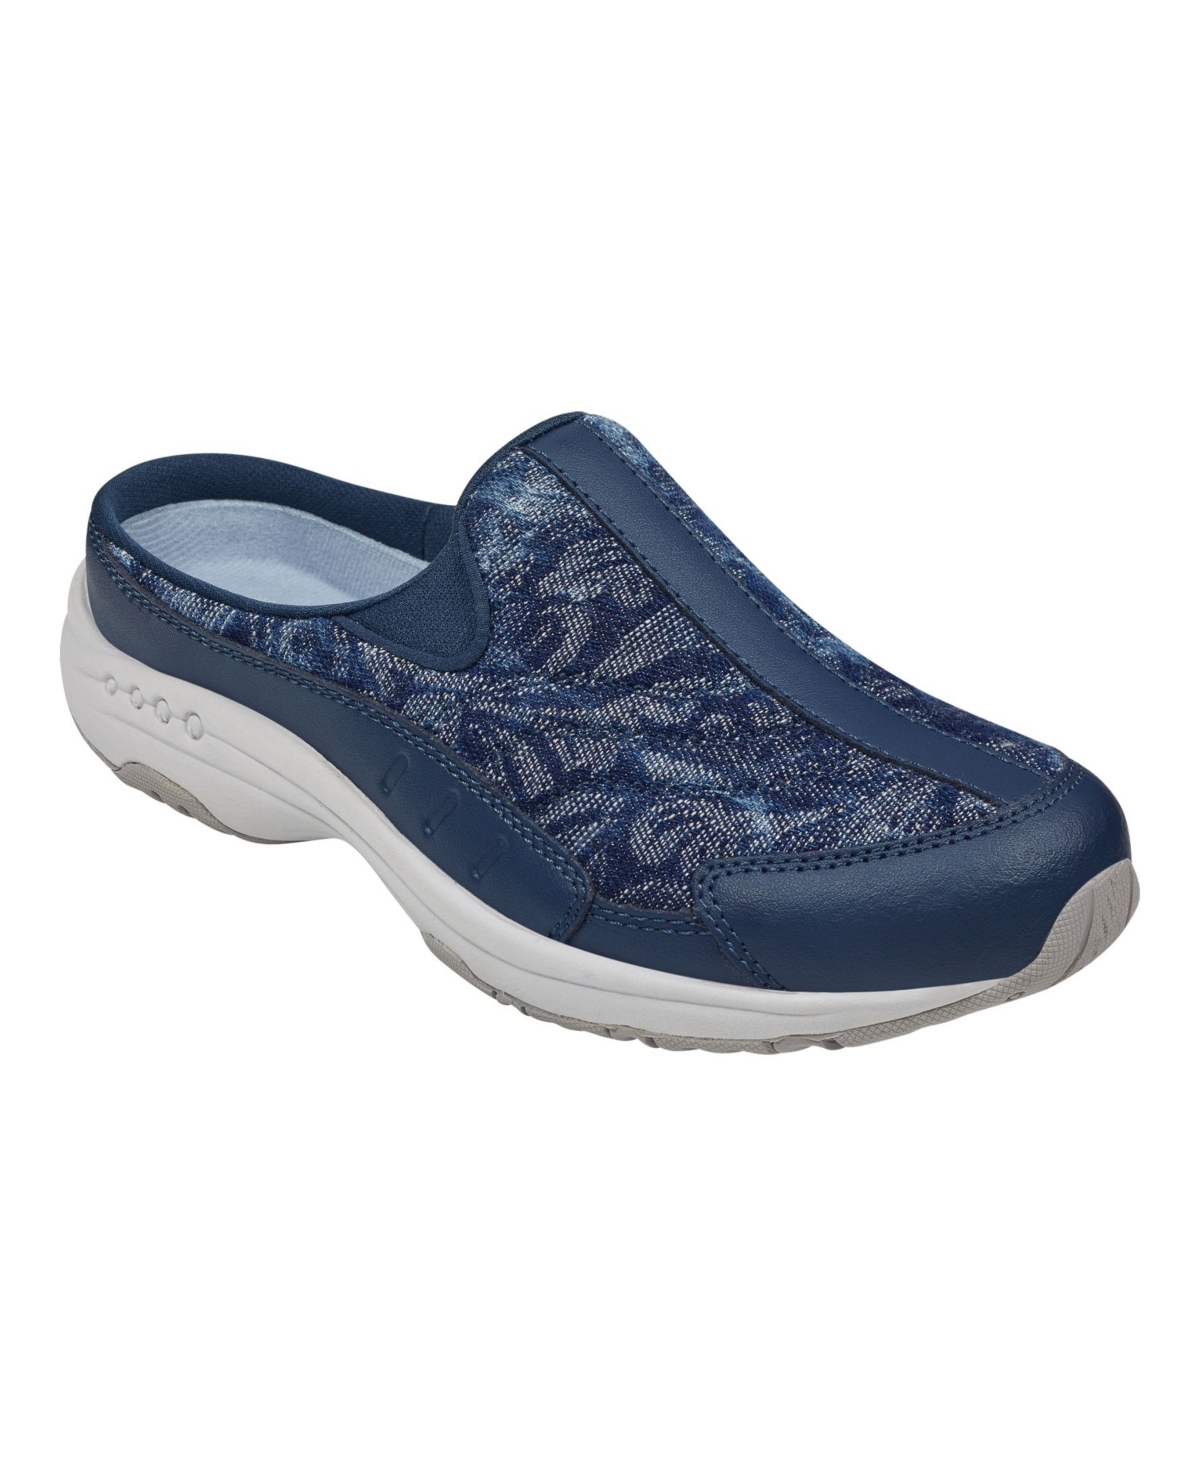 Women's Traveltime Round Toe Casual Slip-on Mules - Denim Patchwork Print, Suede and Textile